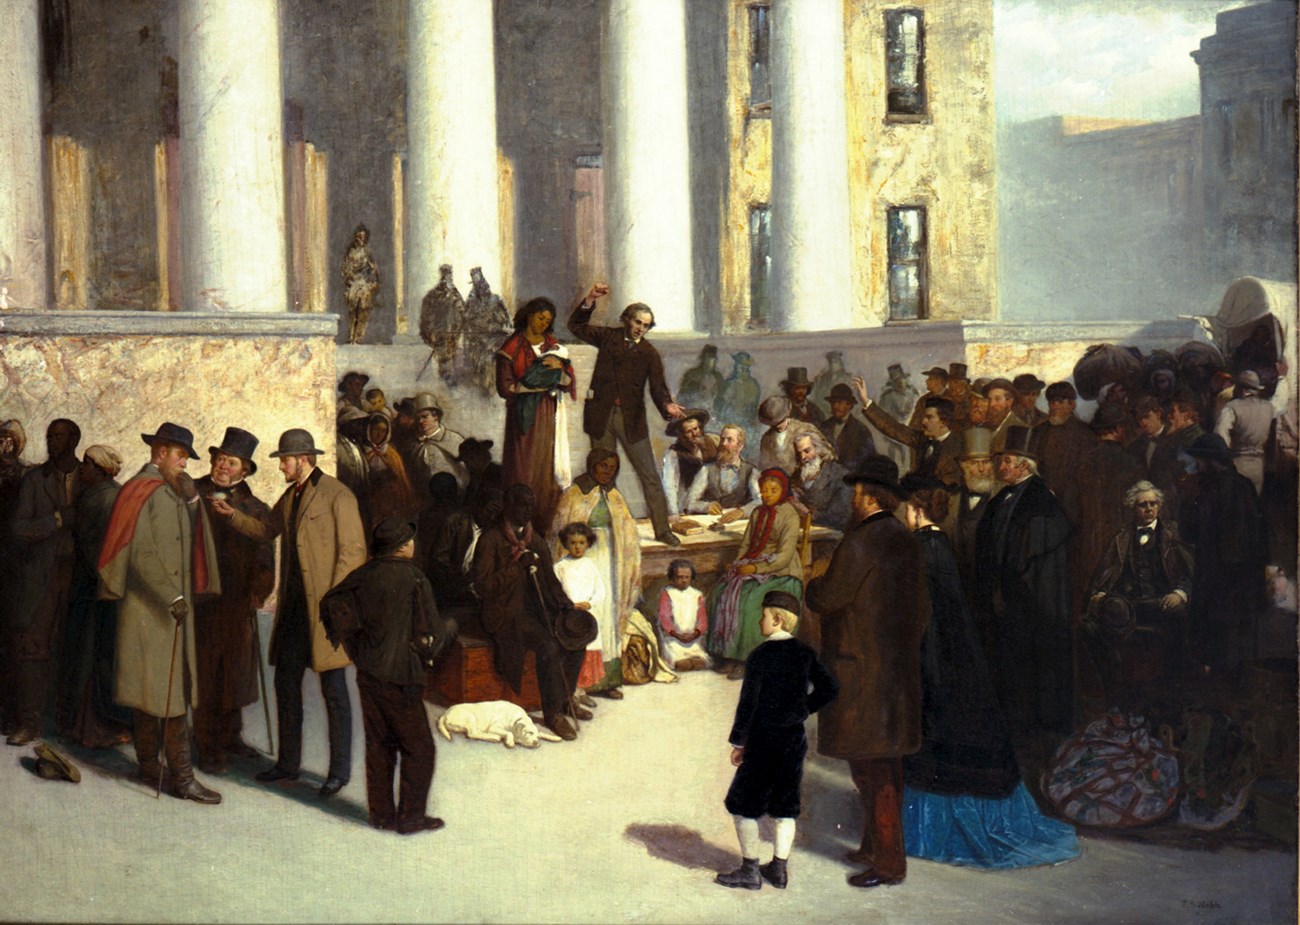 Painting that depicts a large group of people at the St. Louis Courthouse during a slave auction.